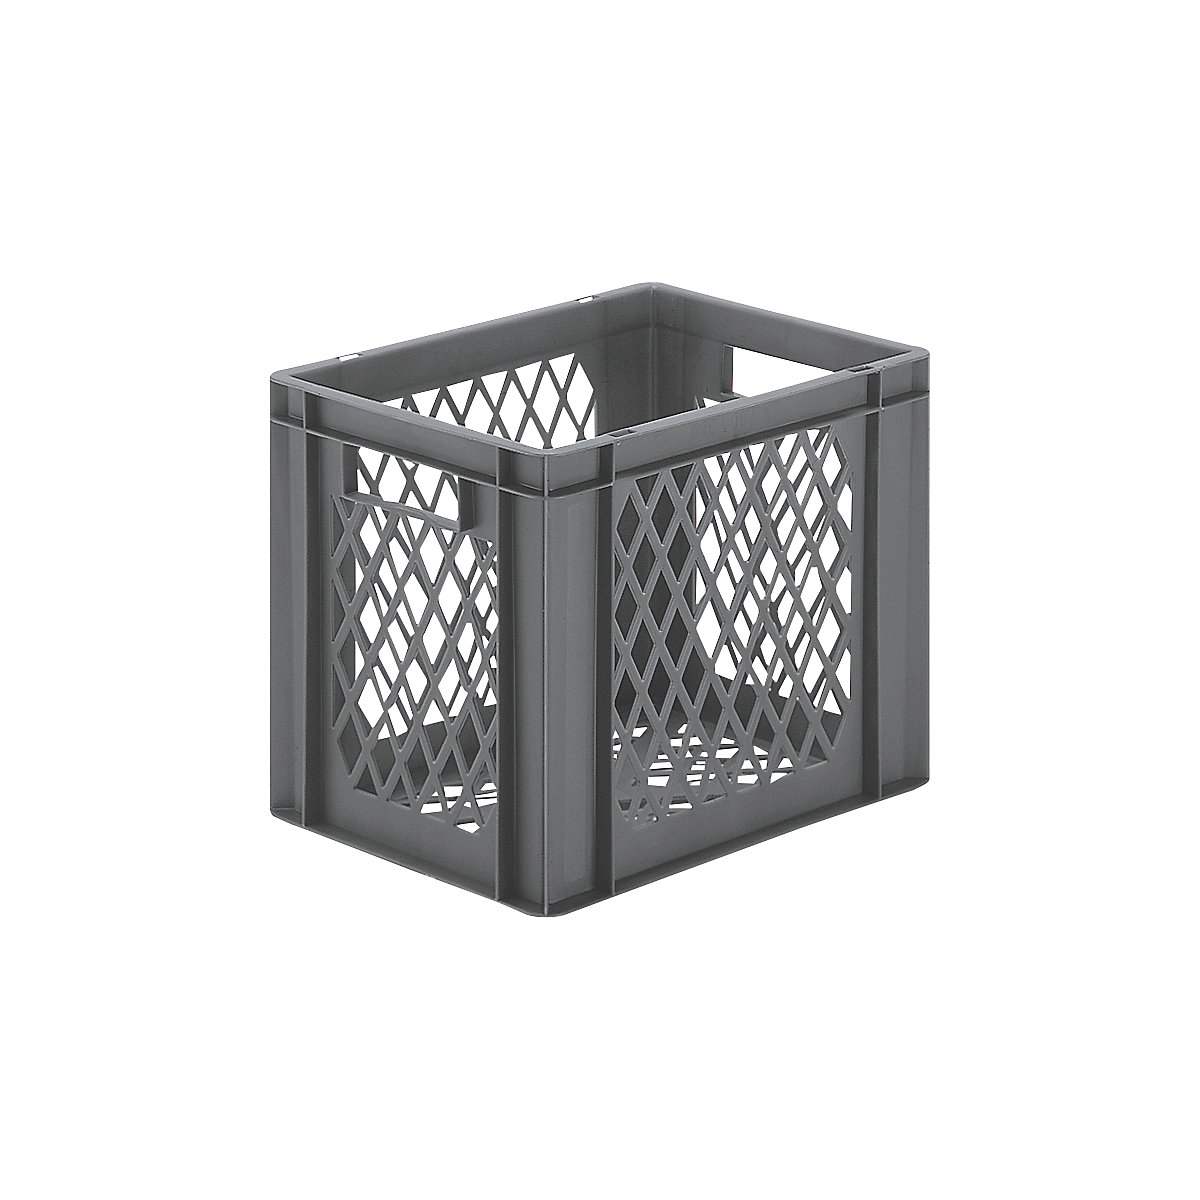 Euro stacking container, perforated walls and base, LxWxH 400 x 300 x 320 mm, grey, pack of 5-8